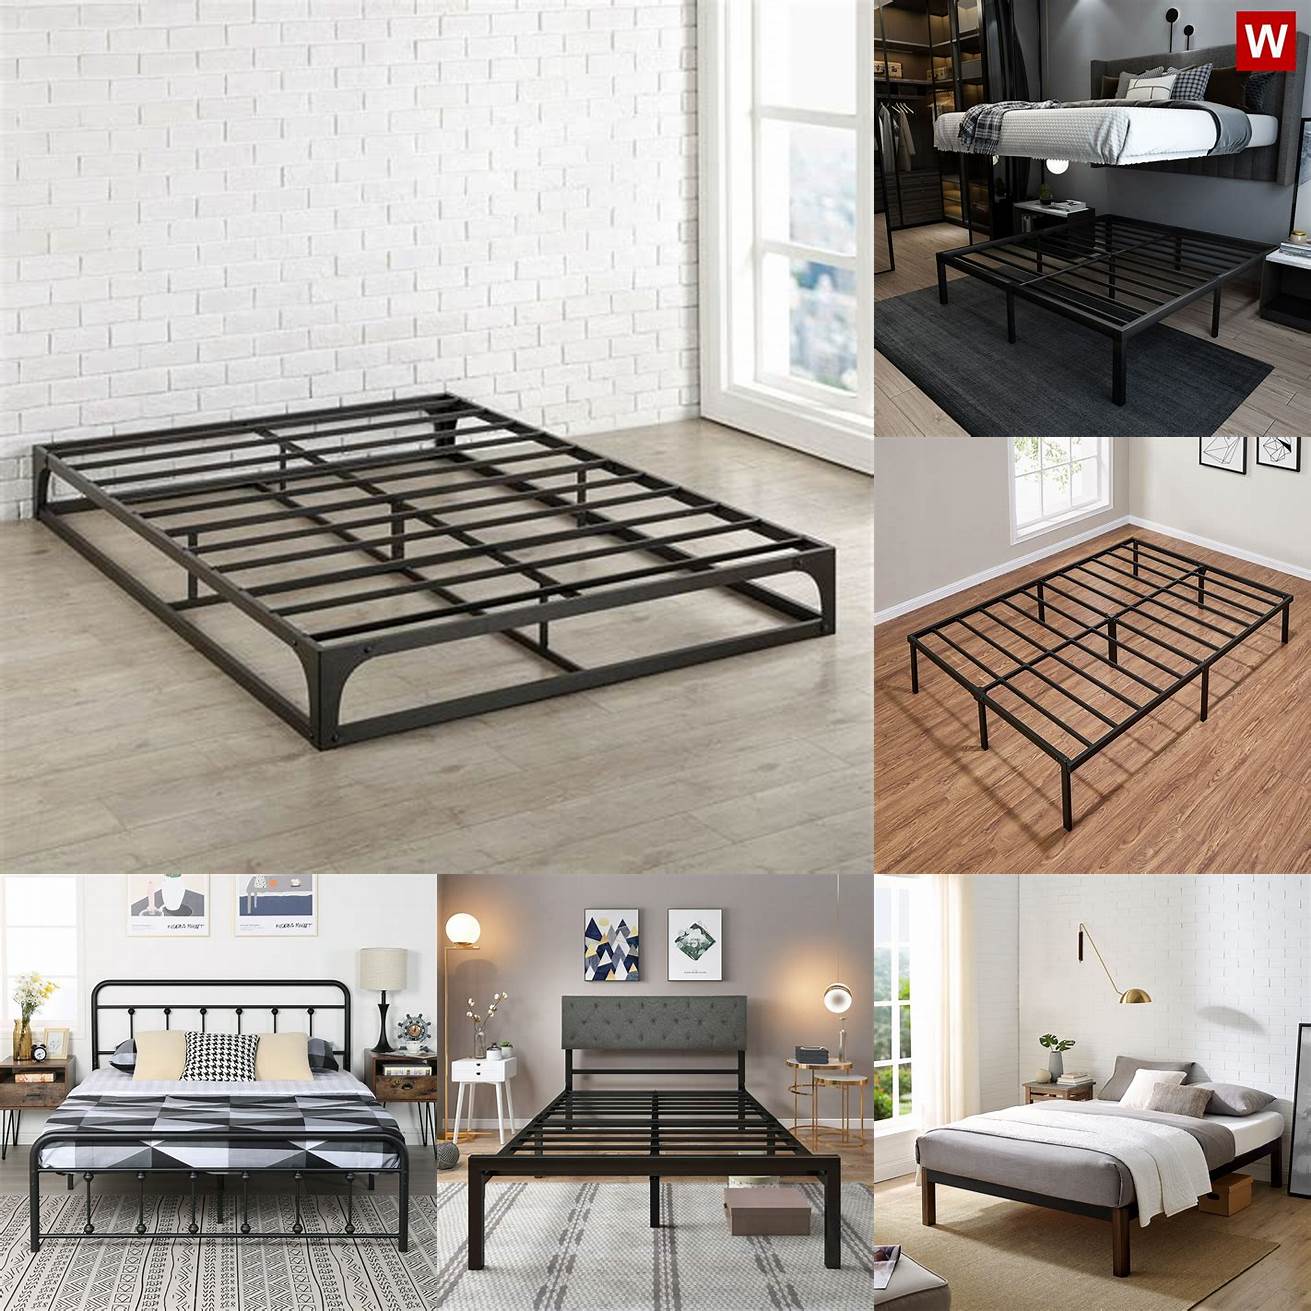 A platform bed frame with metal legs